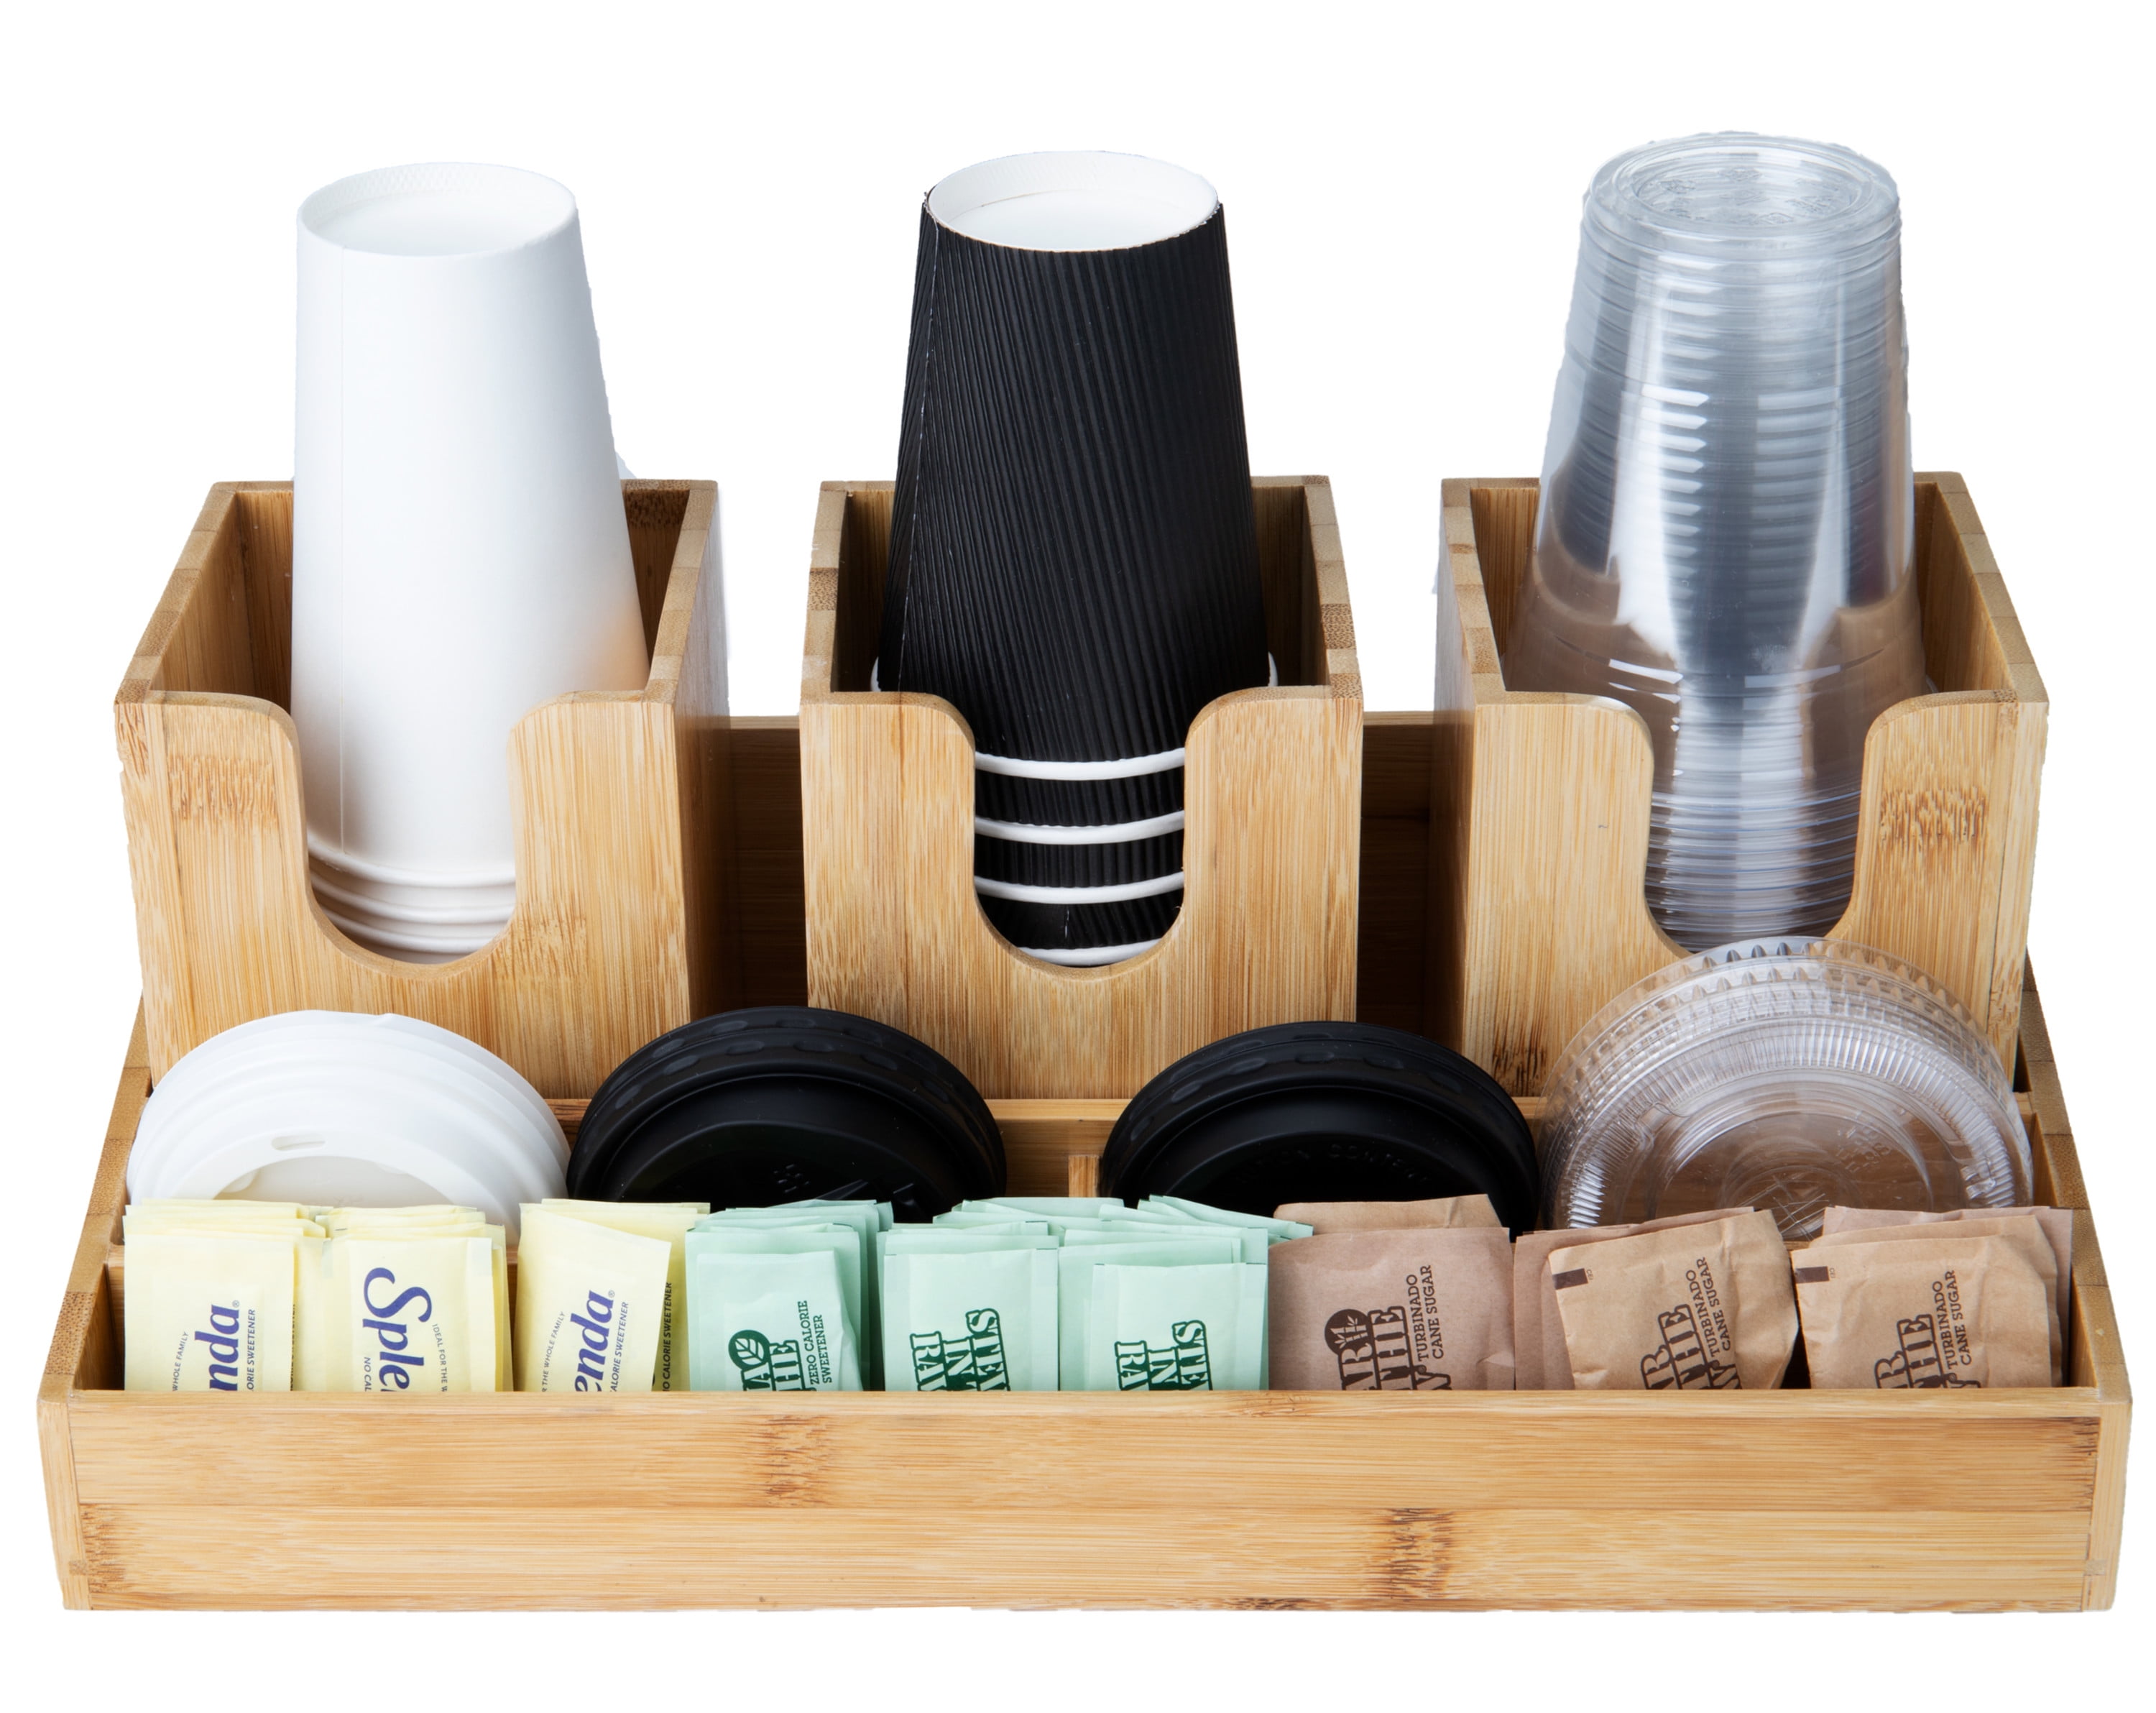 Mind Reader Coffee Condiment and Snack Organizer, Home, Office, Break Room,  Black in the Coffee & Beverage Organization department at